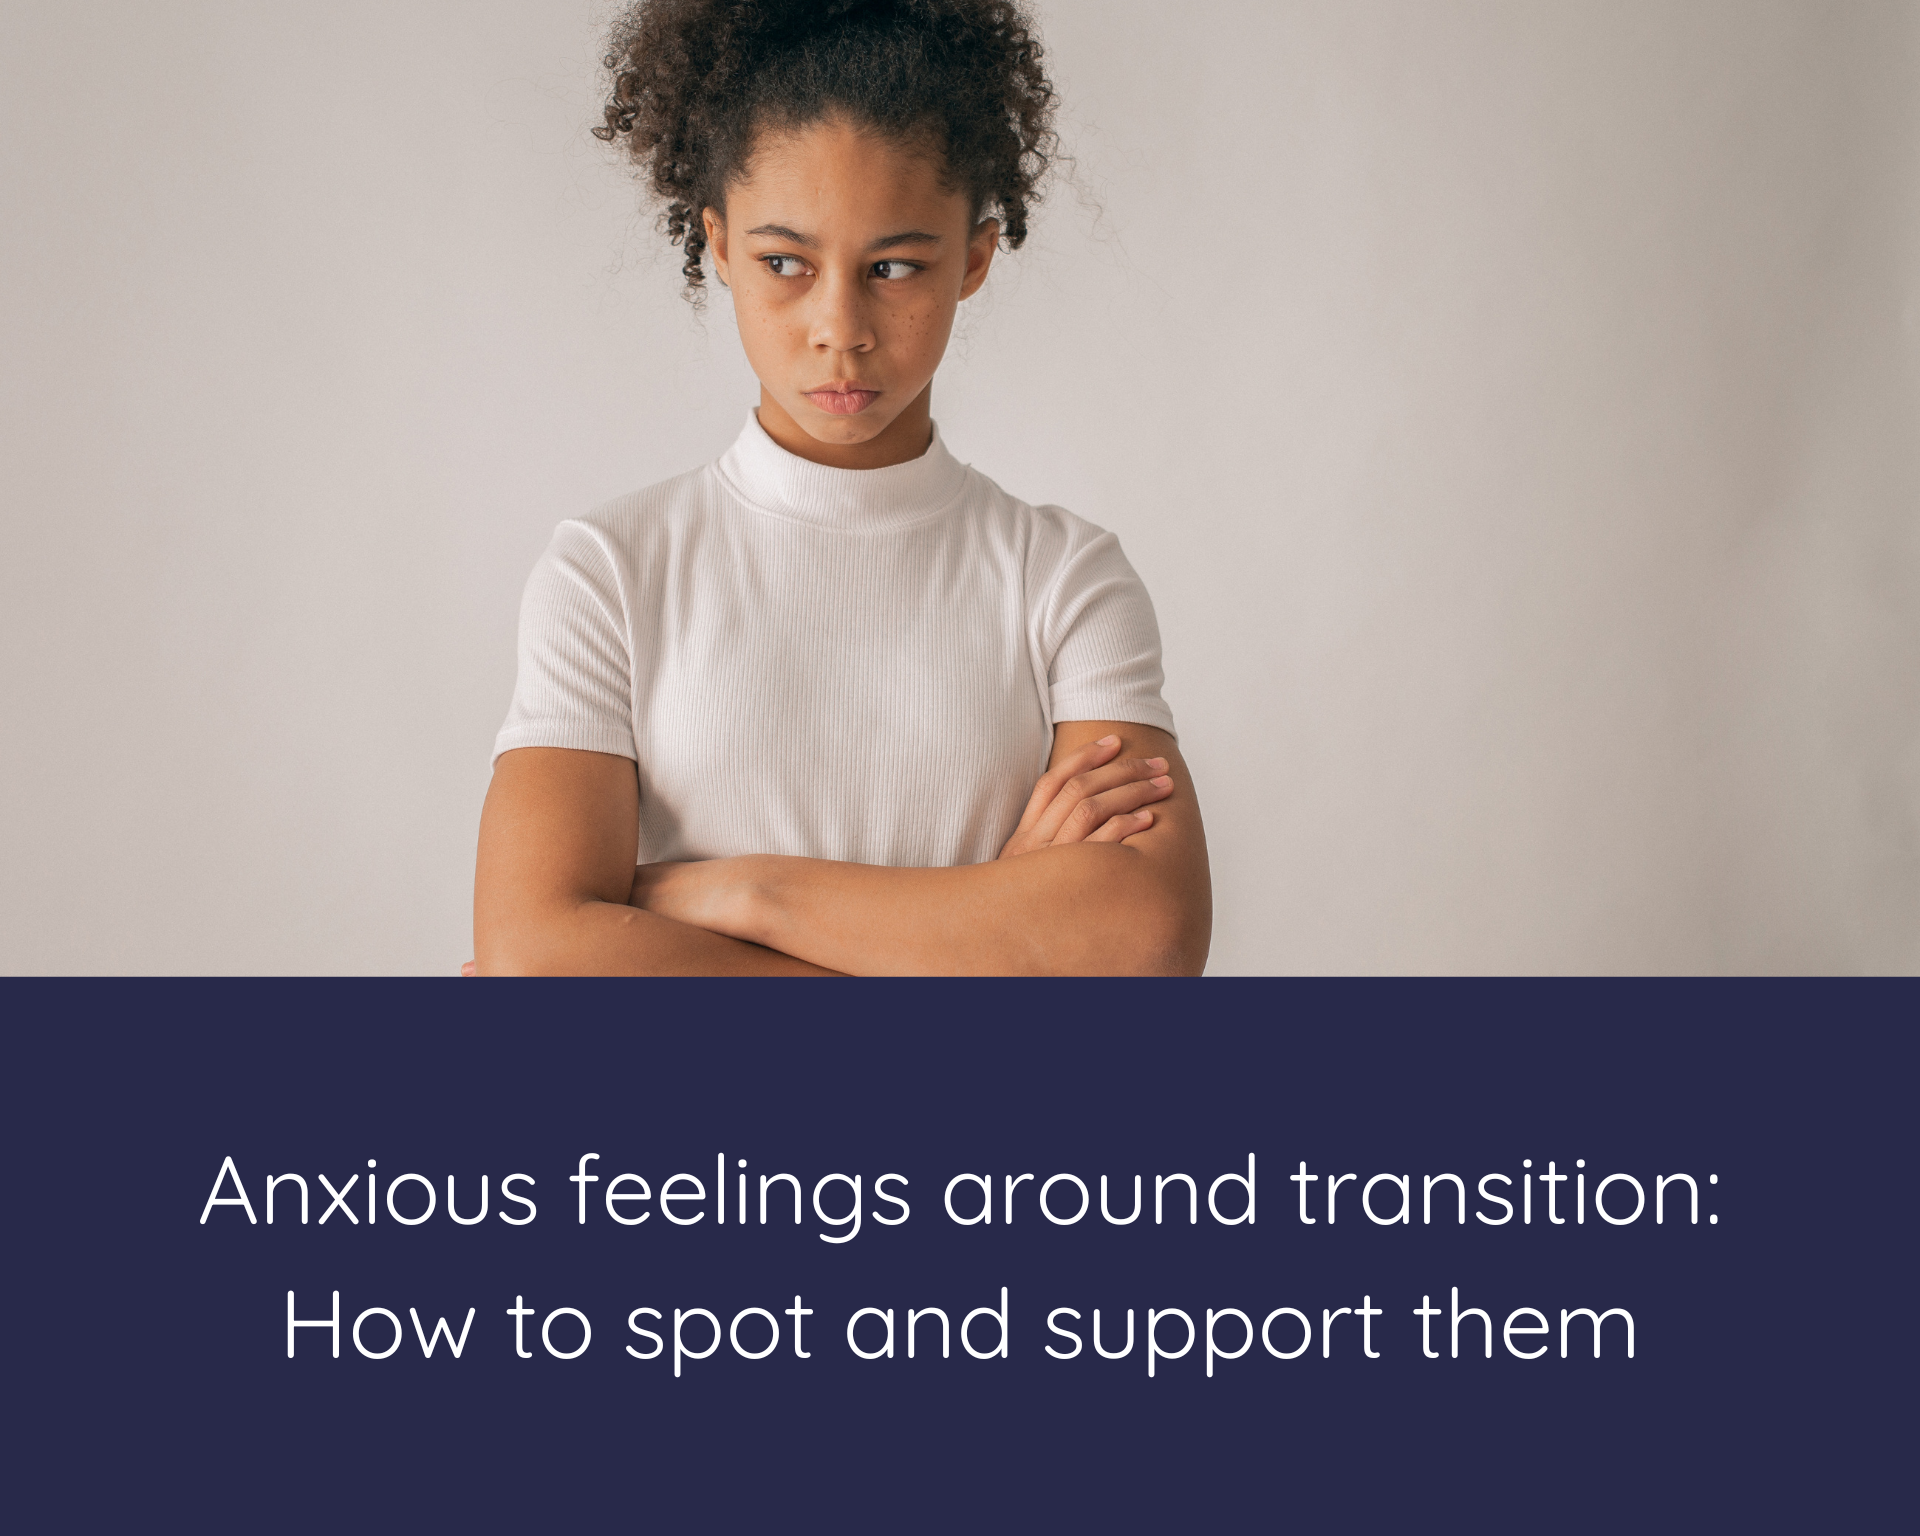 Anxious feelings around transition: How to spot and support them